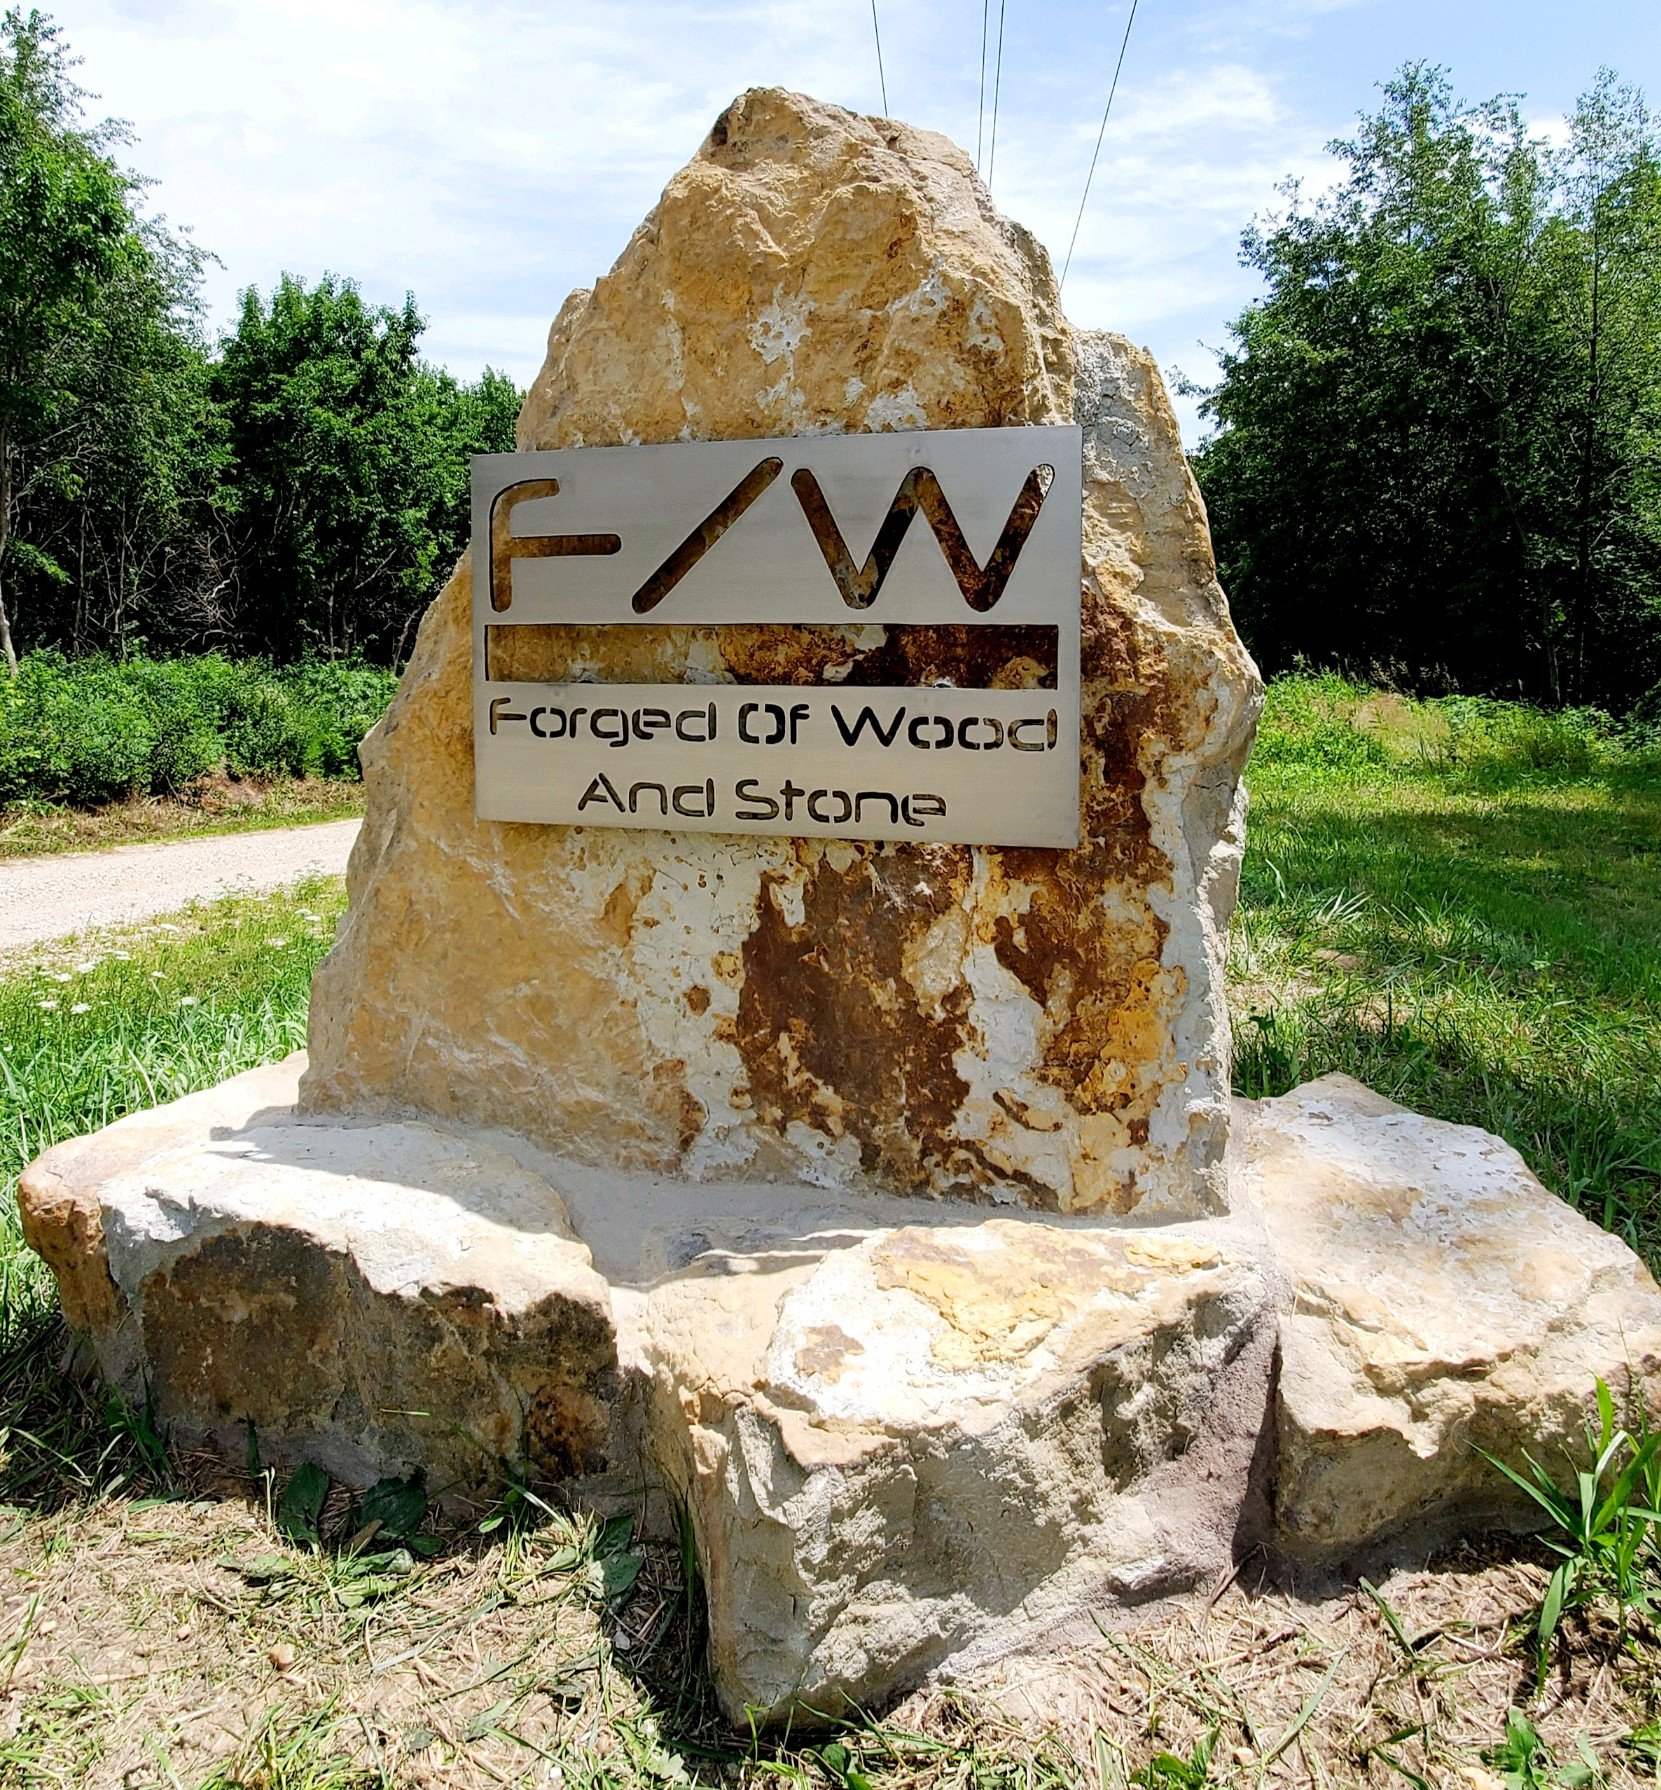 Entrance sign at Forged of Wood and stone